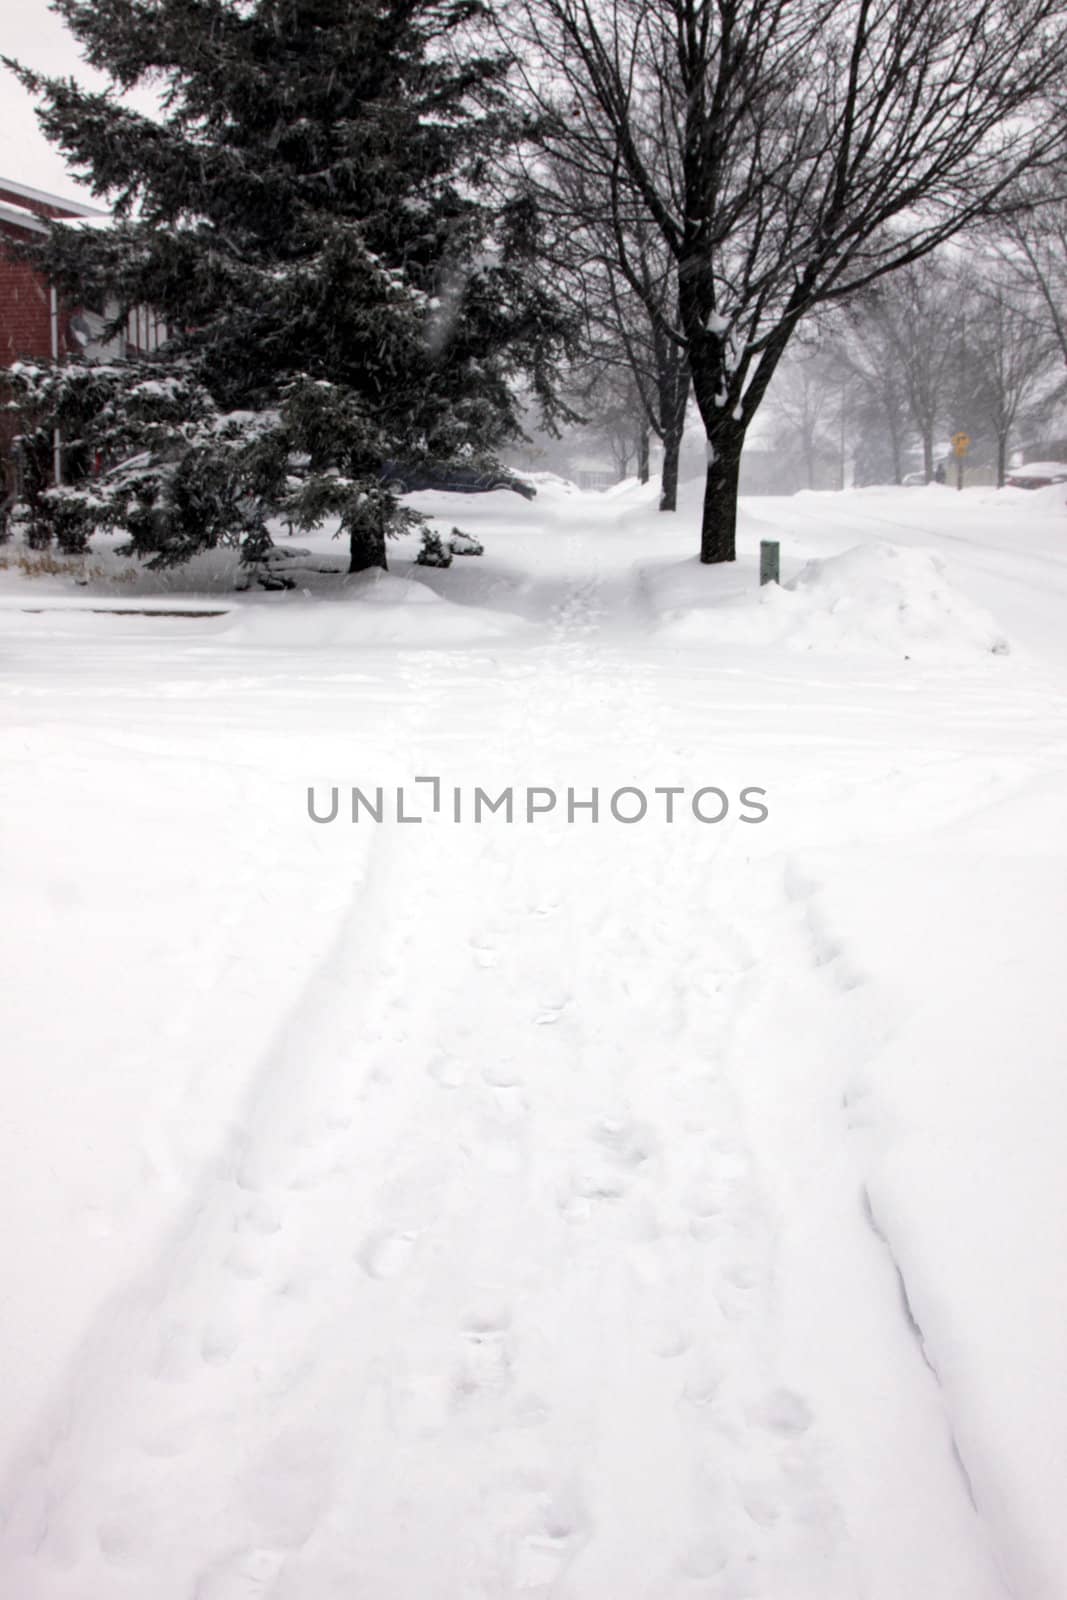 A fresh snow fall in the suburbs, featuring snow covered side walk with a single set of footprints.
